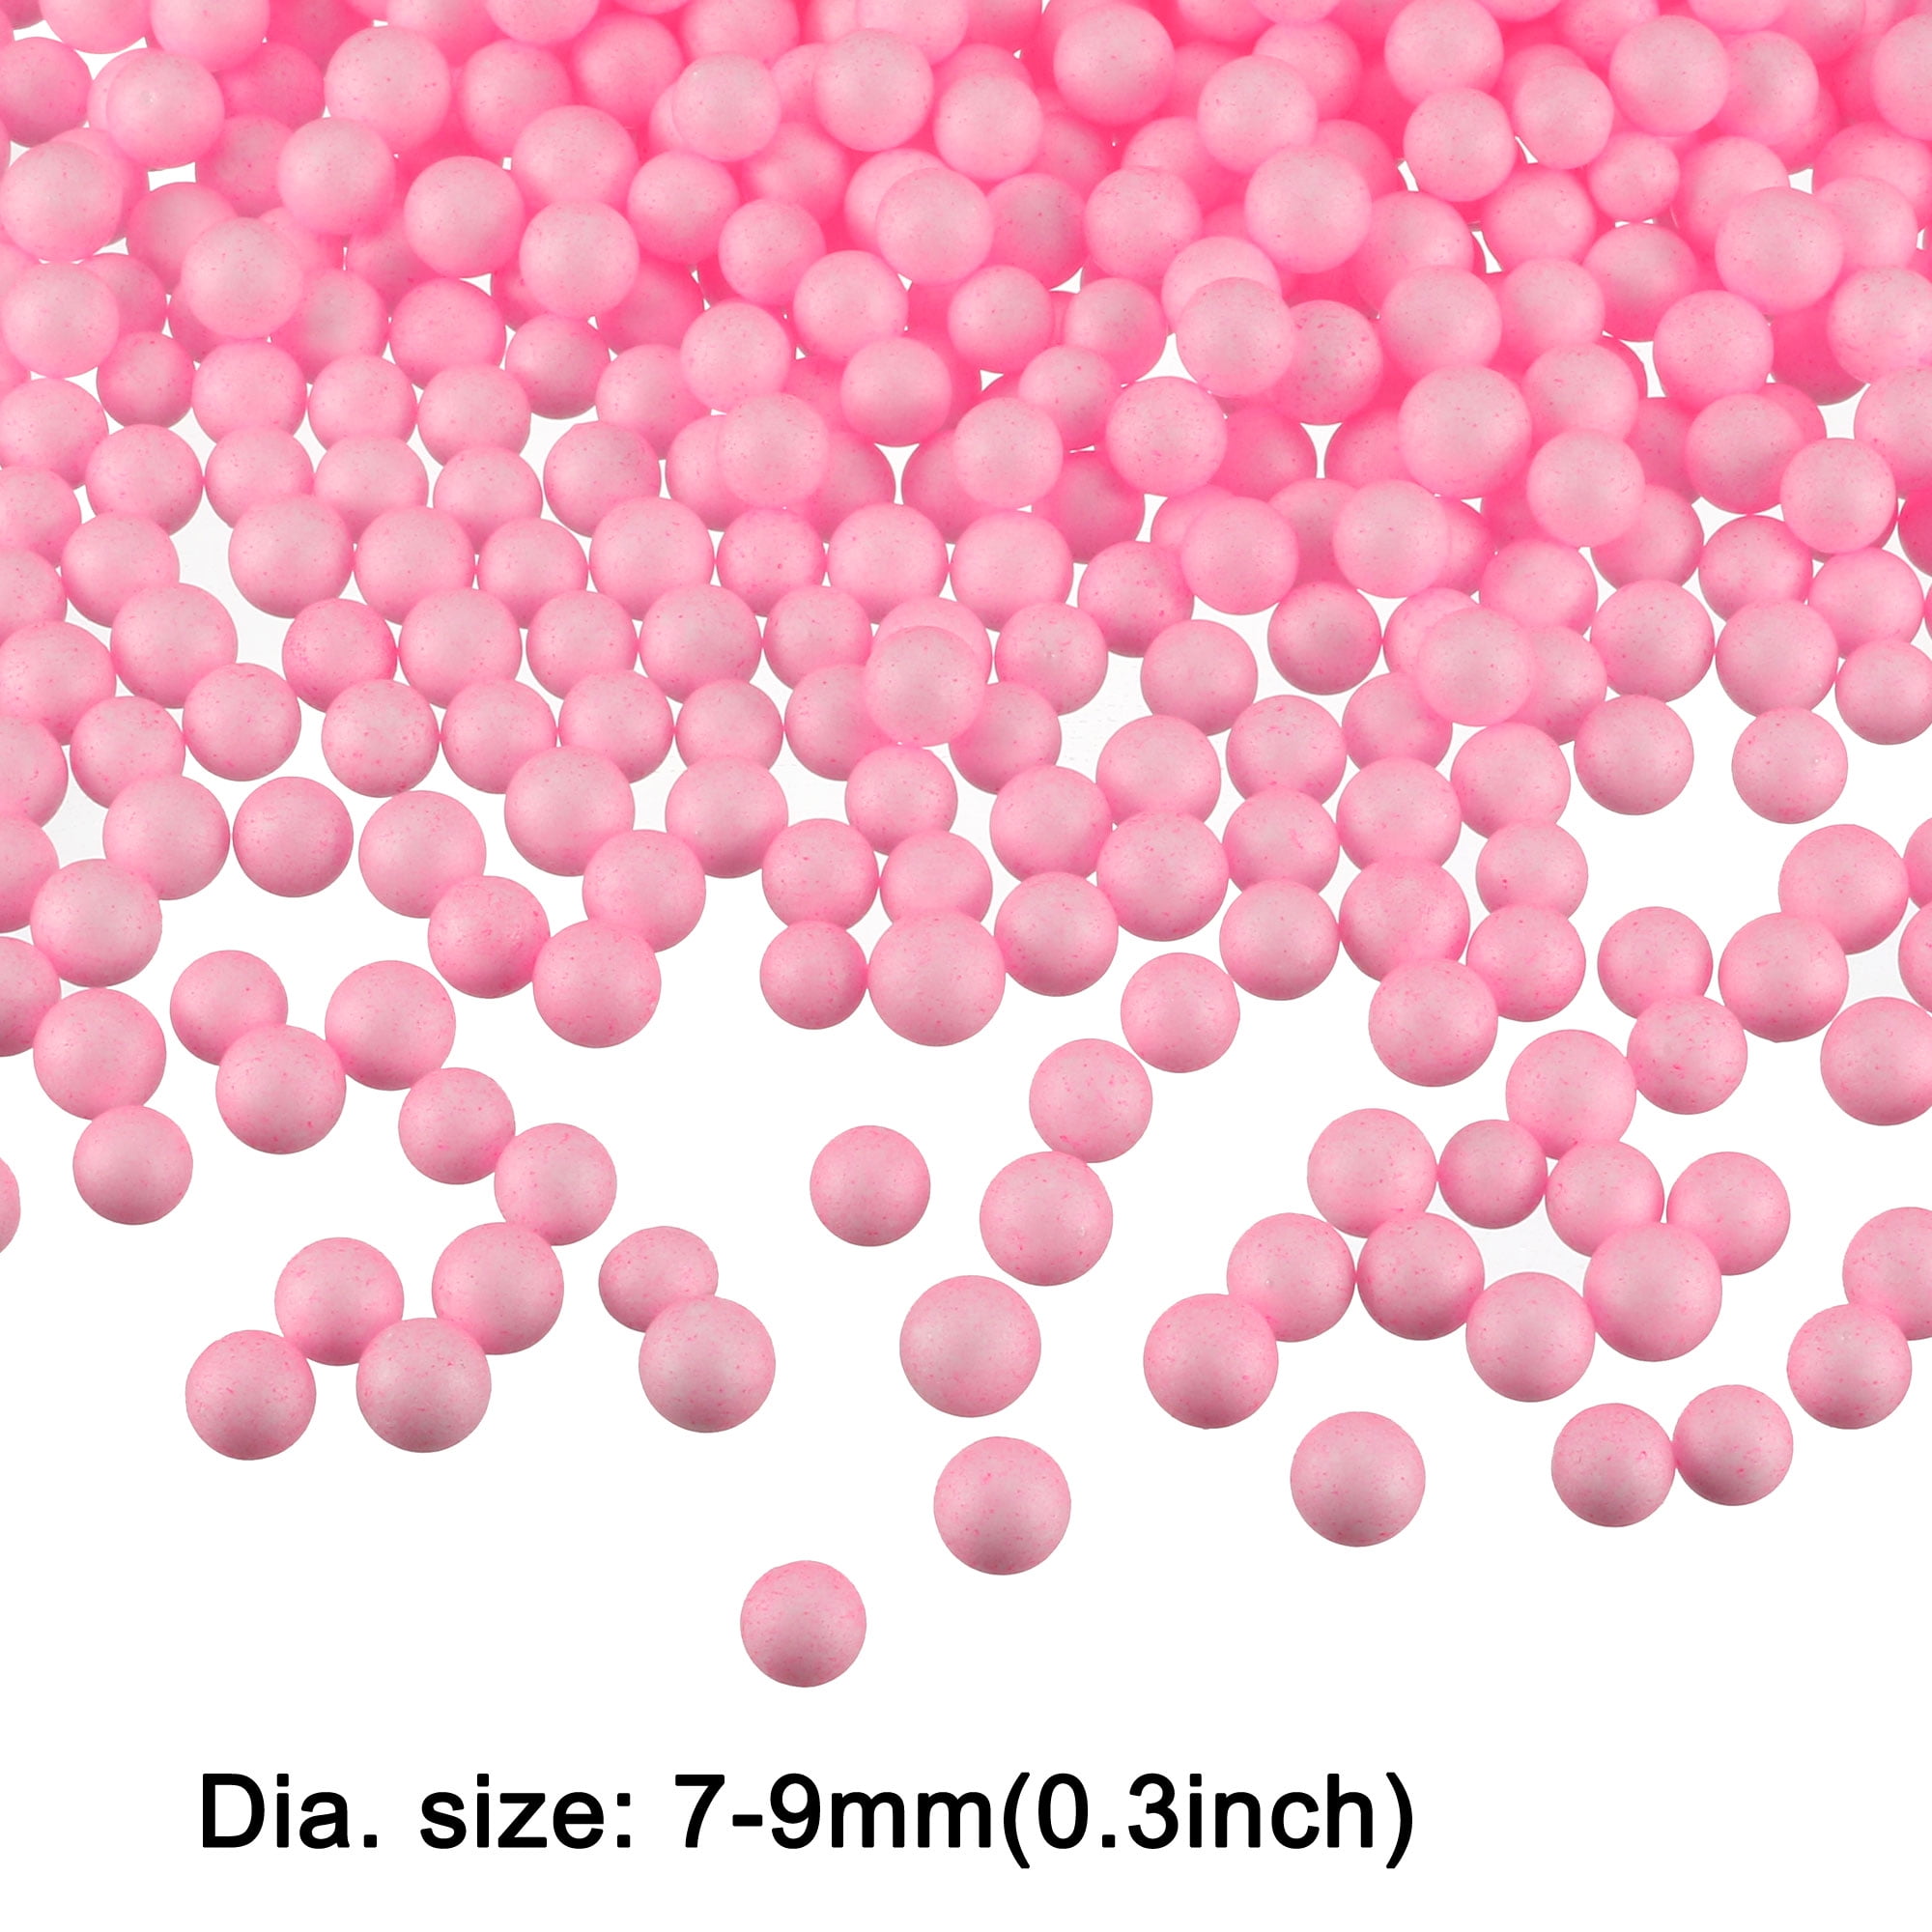 Uxcell 0.1 Pink Polystyrene Foam Beads Ball Mini for Crafts Fillings 1 Pack